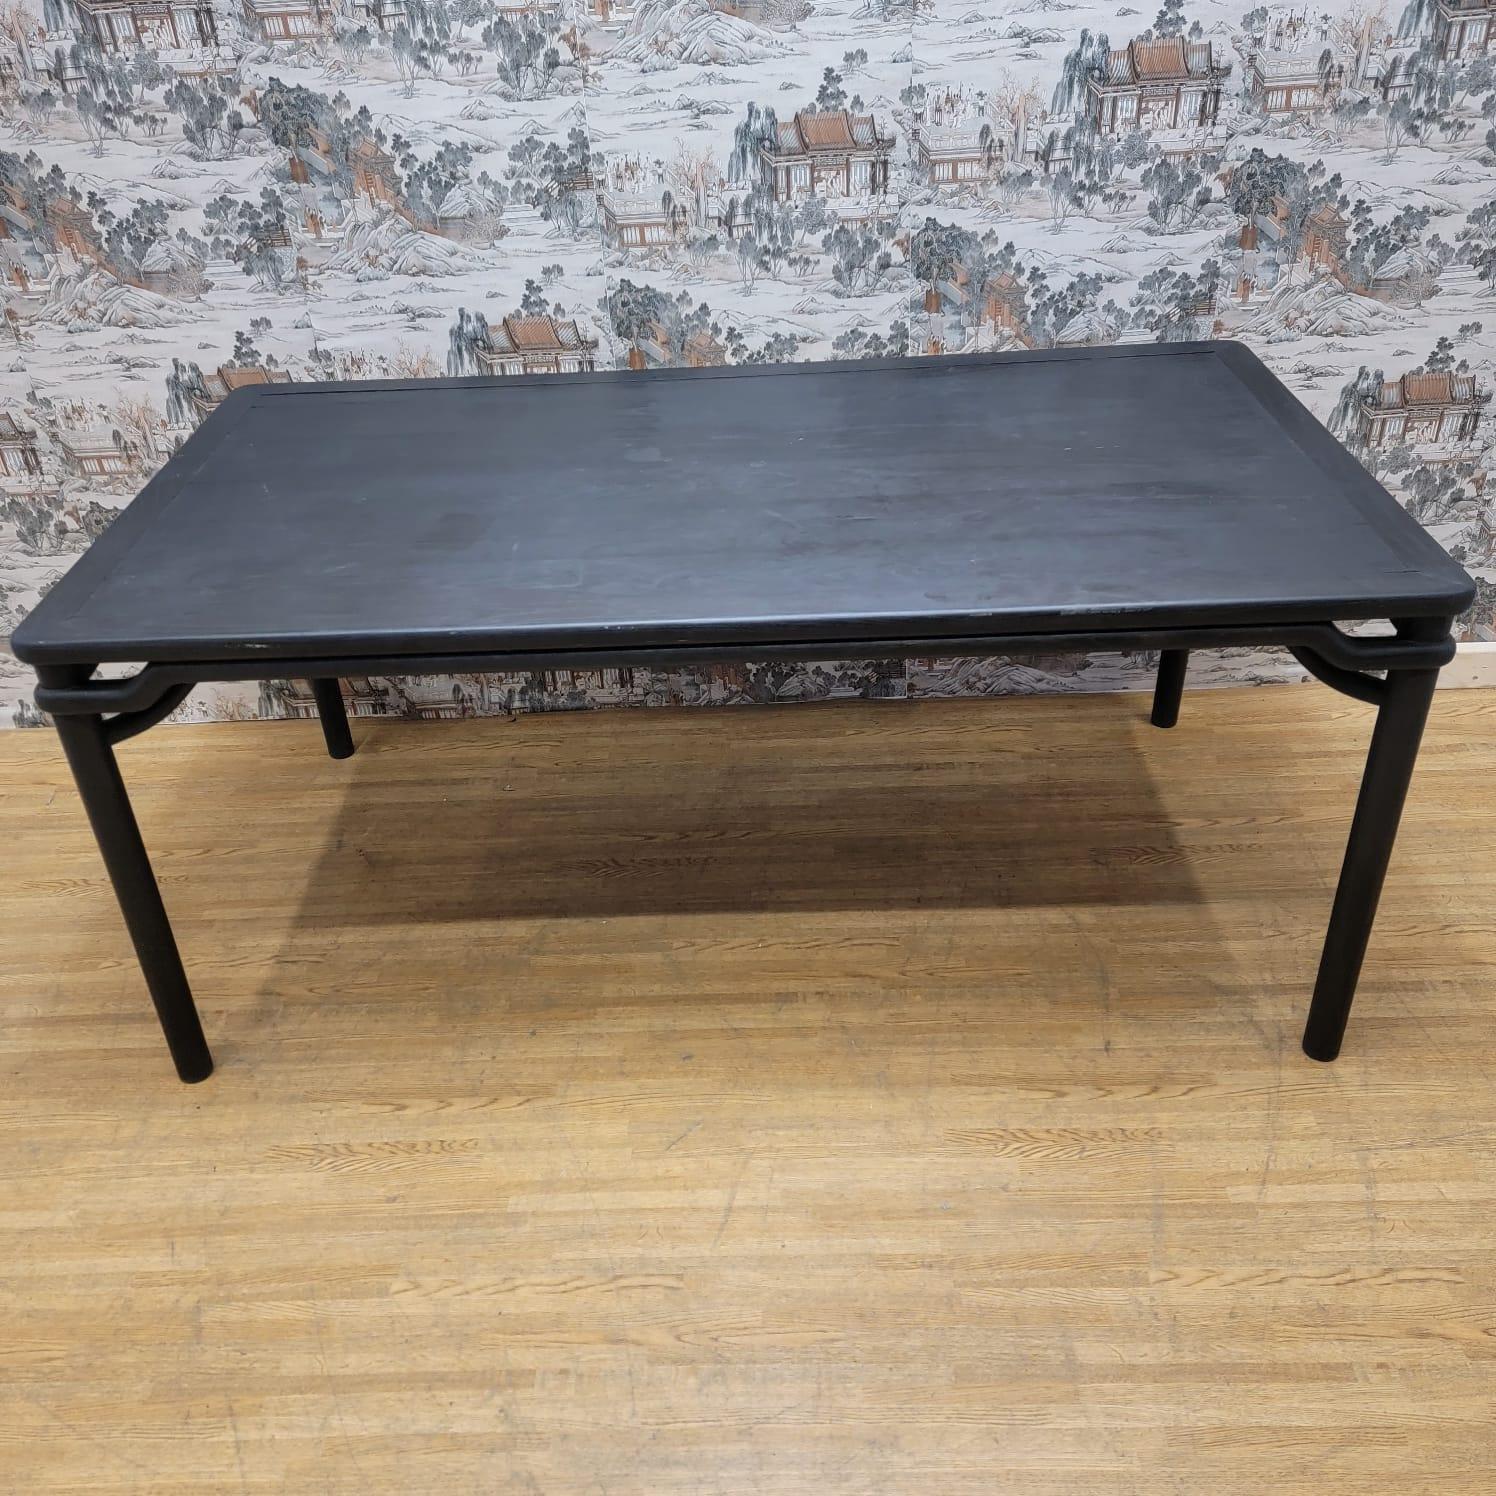 Vintage Shanxi Province Black Lacquered Elm 6 Seat Dining Table

Circa: 1990

Dimensions:

W: 68.5